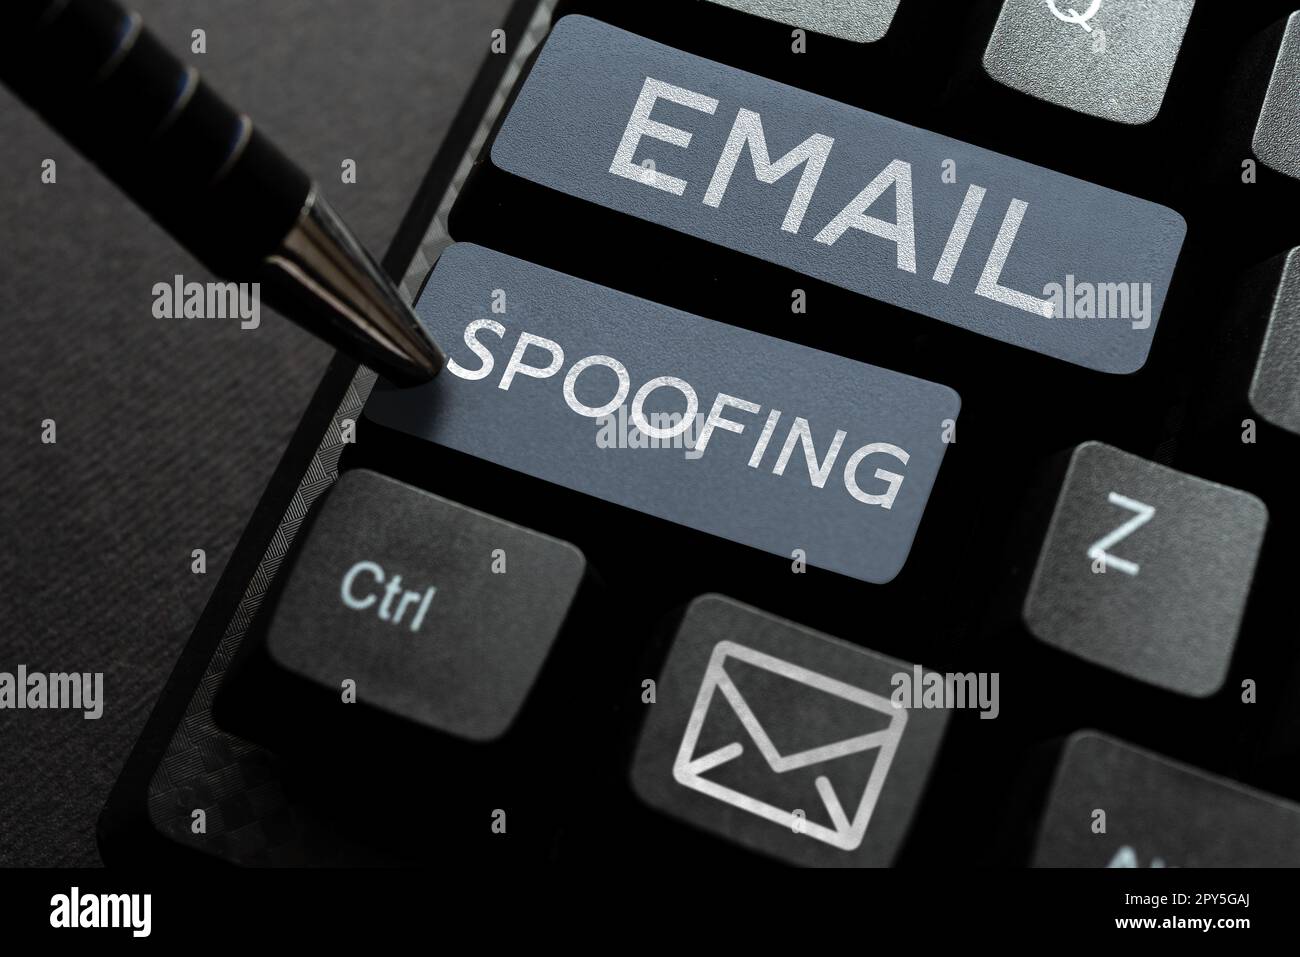 Sign displaying Email Spoofing. Business idea secure the access and content of an email account or service Stock Photo